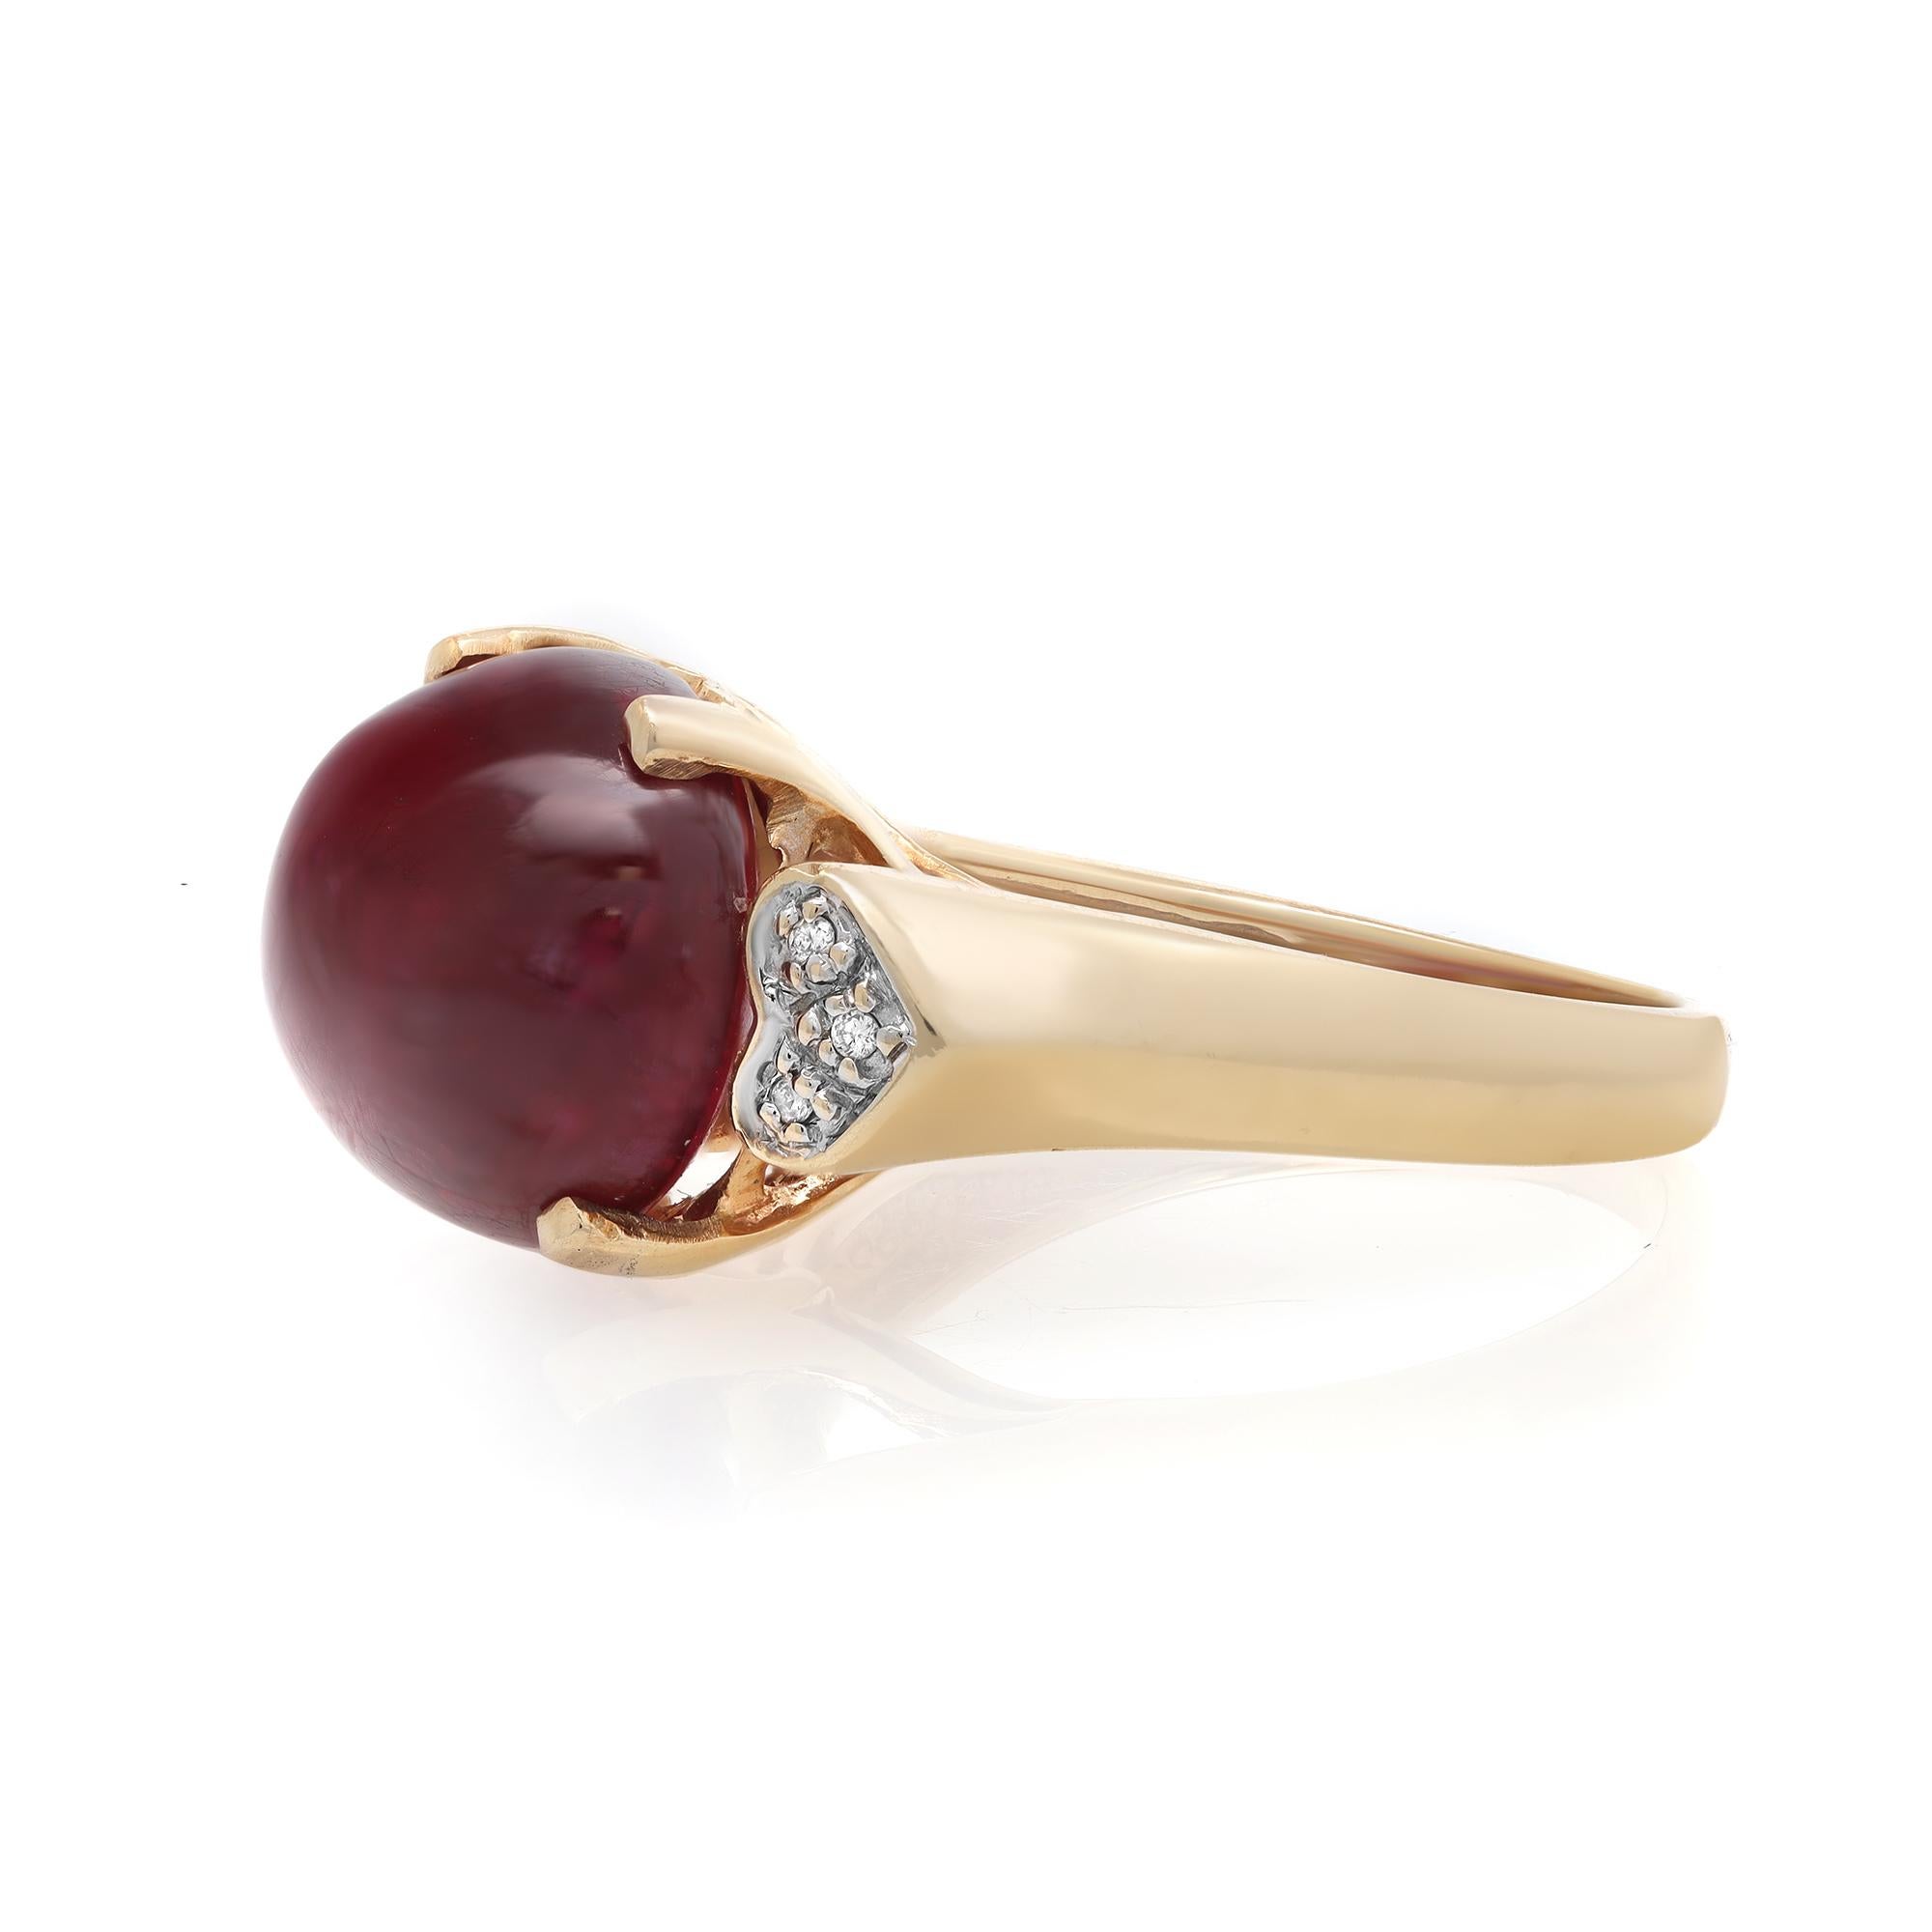 15.30cts Cabochon Ruby & 0.04cts Diamond Ladies Ring 14K Yellow Gold In Excellent Condition For Sale In New York, NY